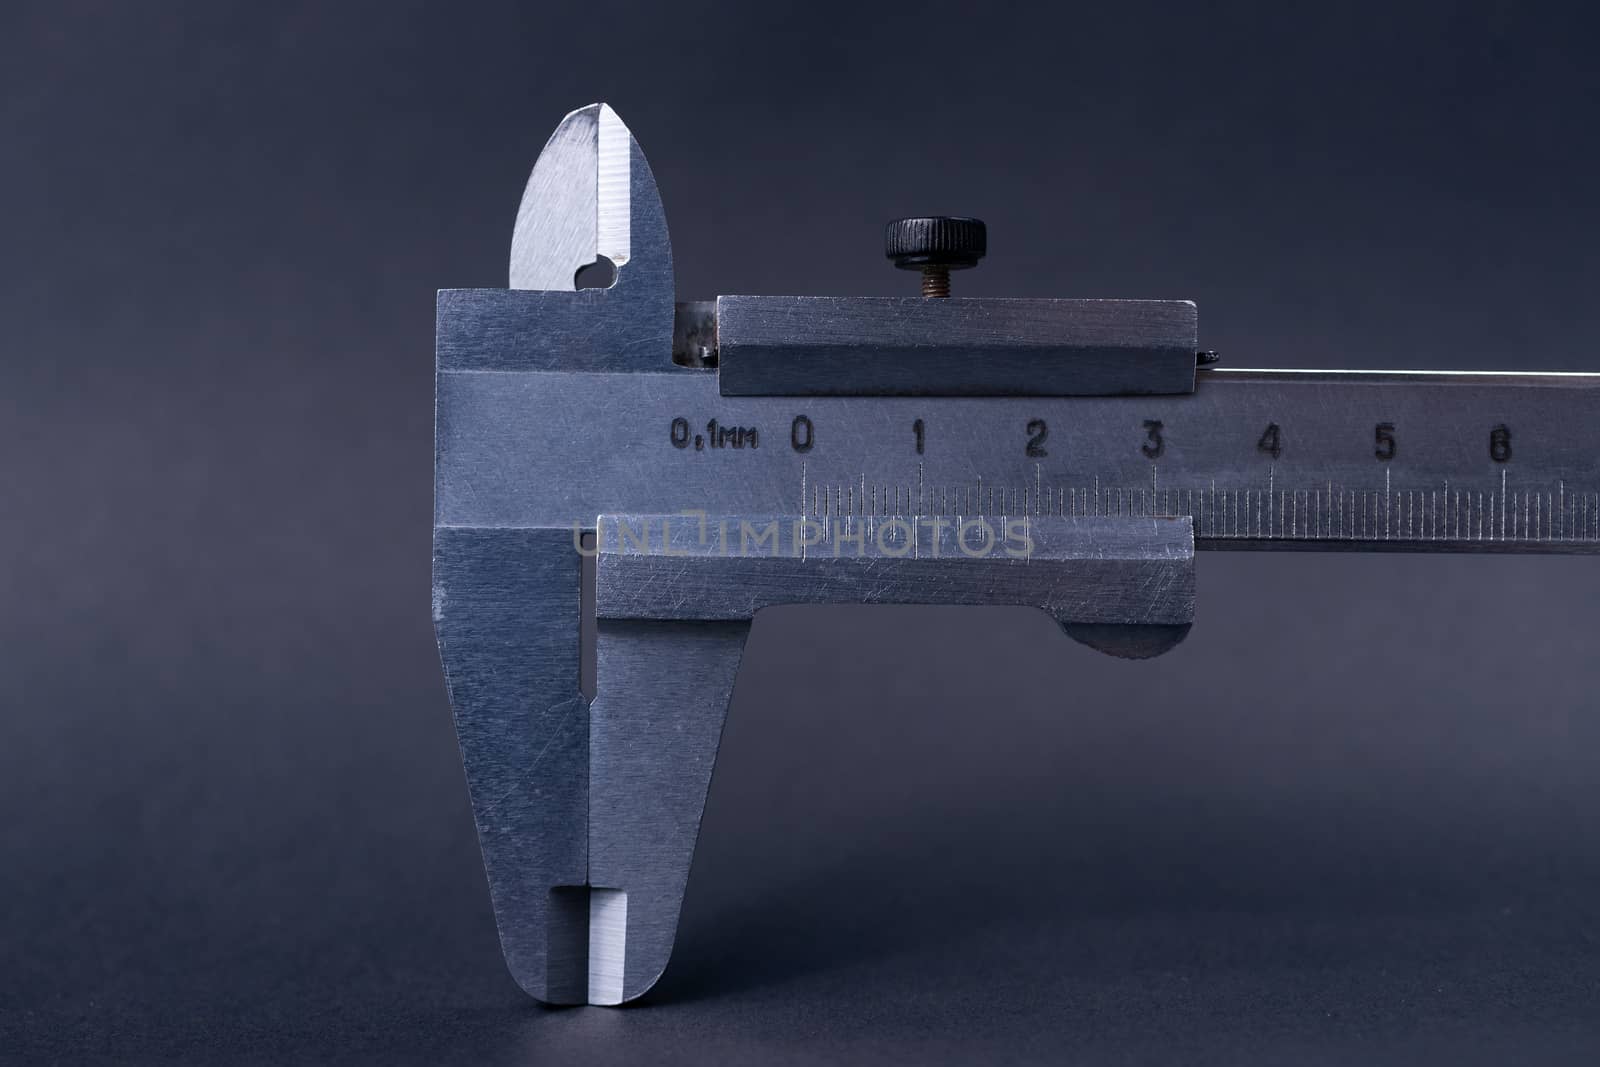 Vintage steel caliper tool closeup. Caliper tips and scale in focus. Tool in very good condition. Scale in metric units, milimeter step. Stock photo on blurred gray background.